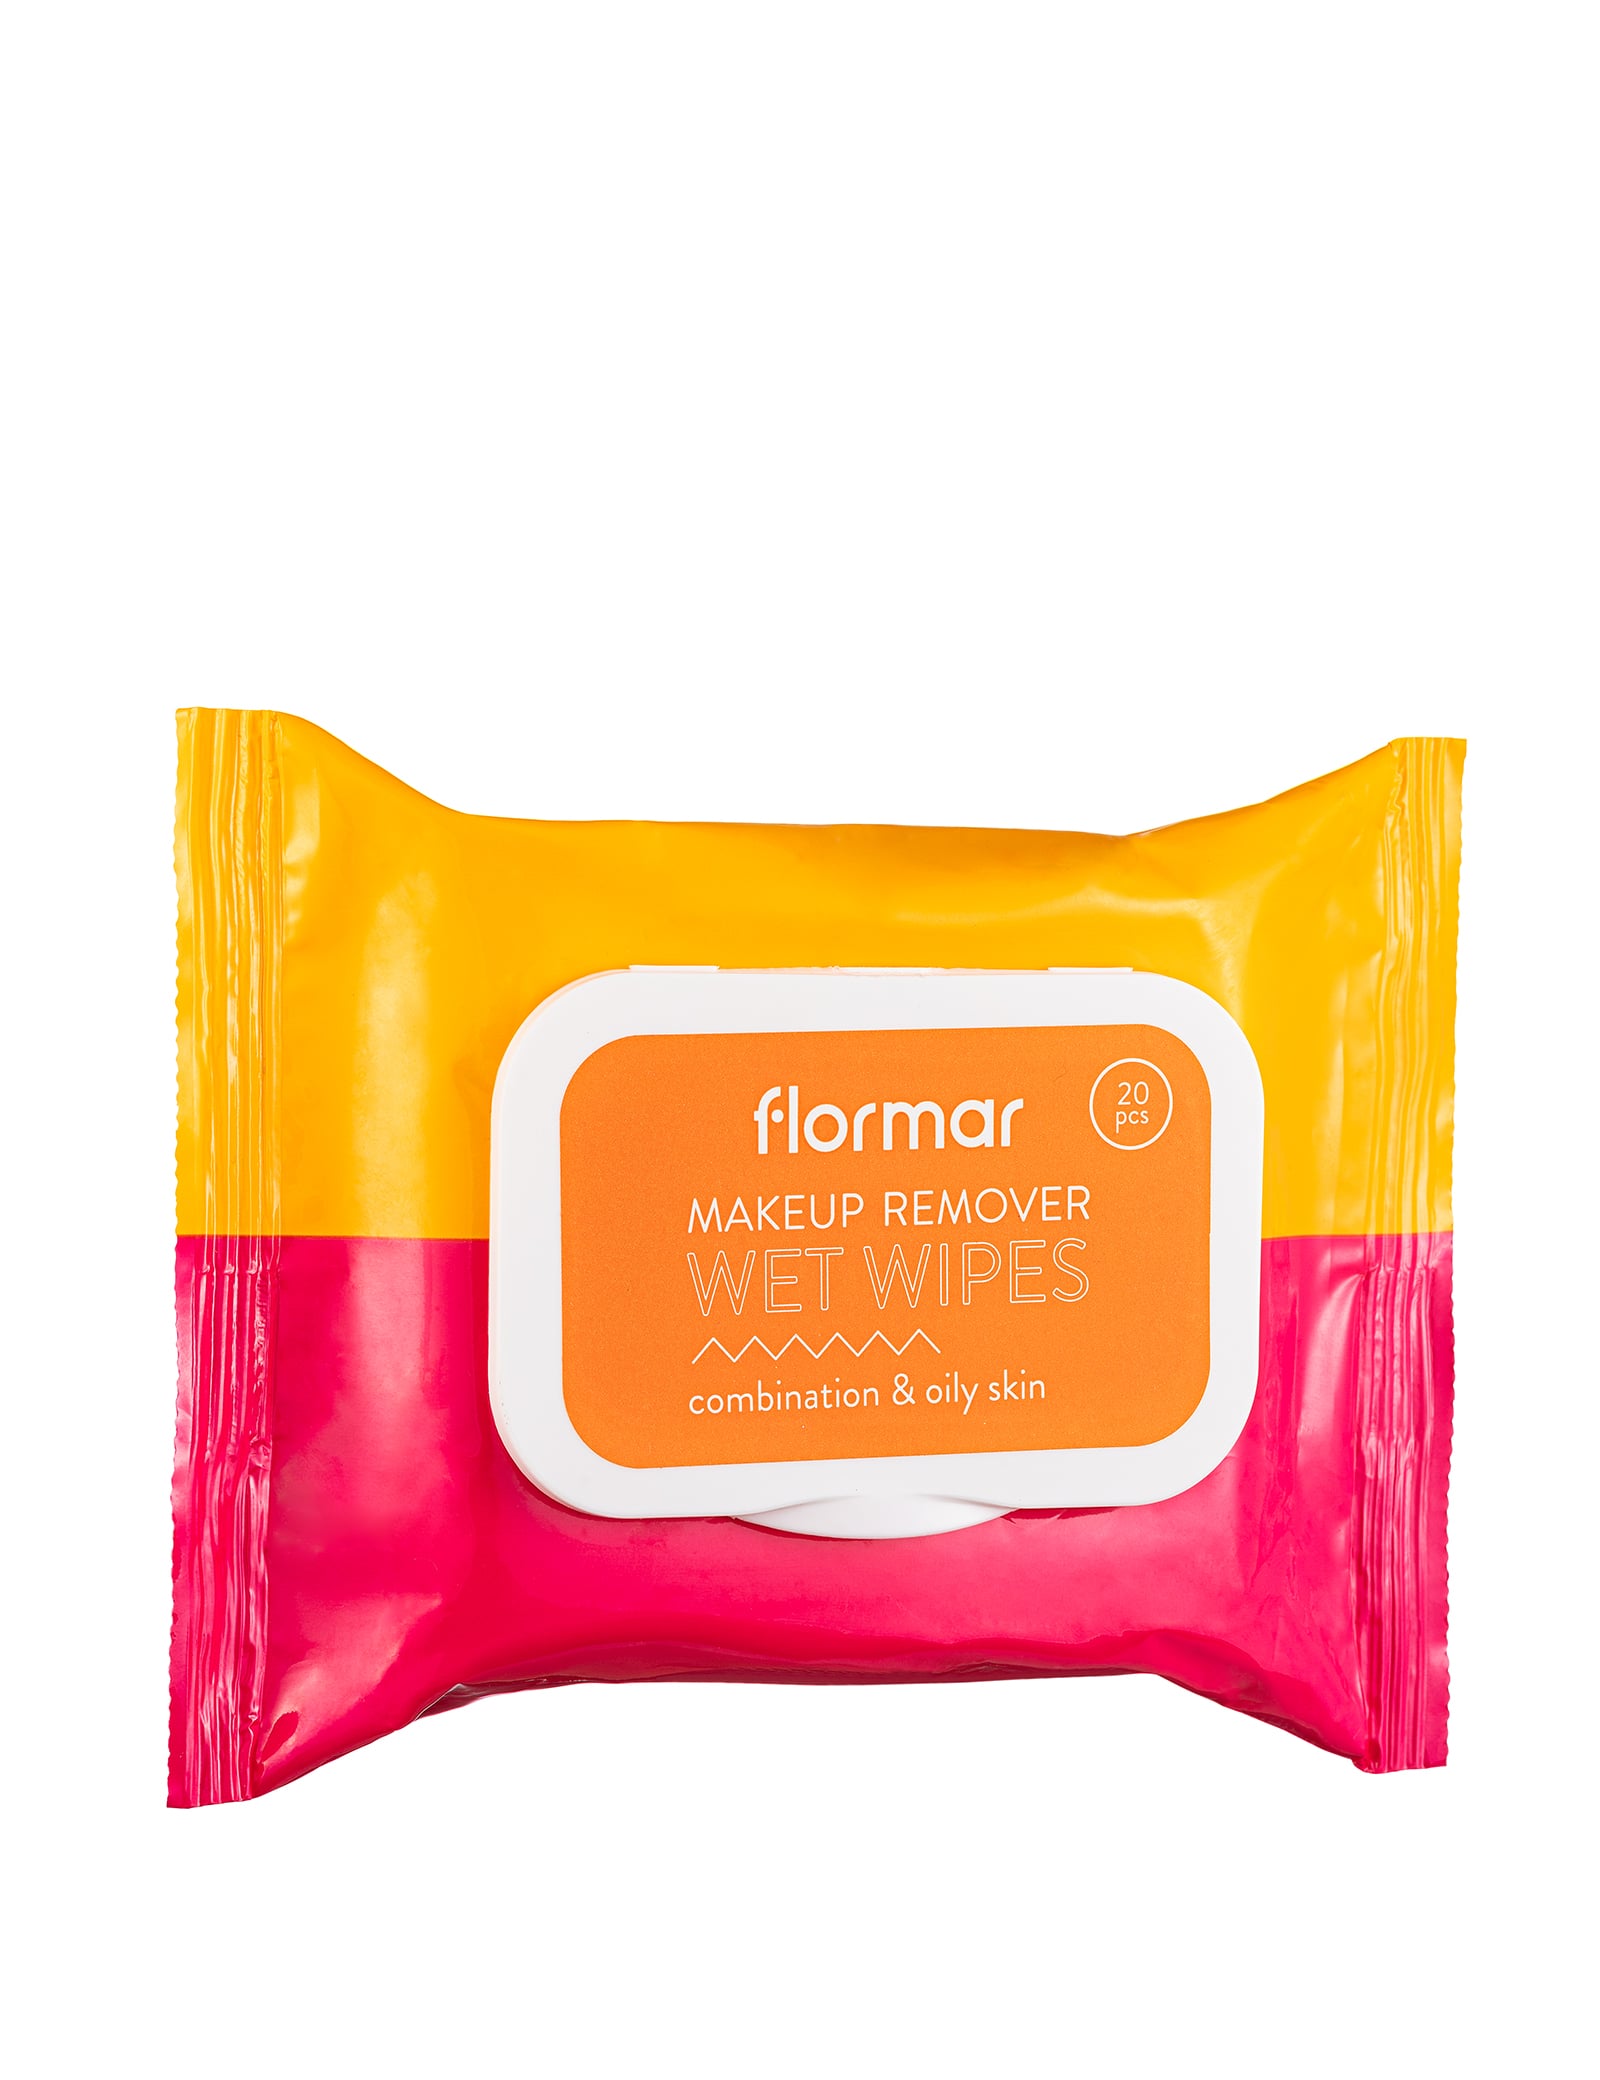 Flormar Makeup Remover Wet Wipes Combination & Oily Skin